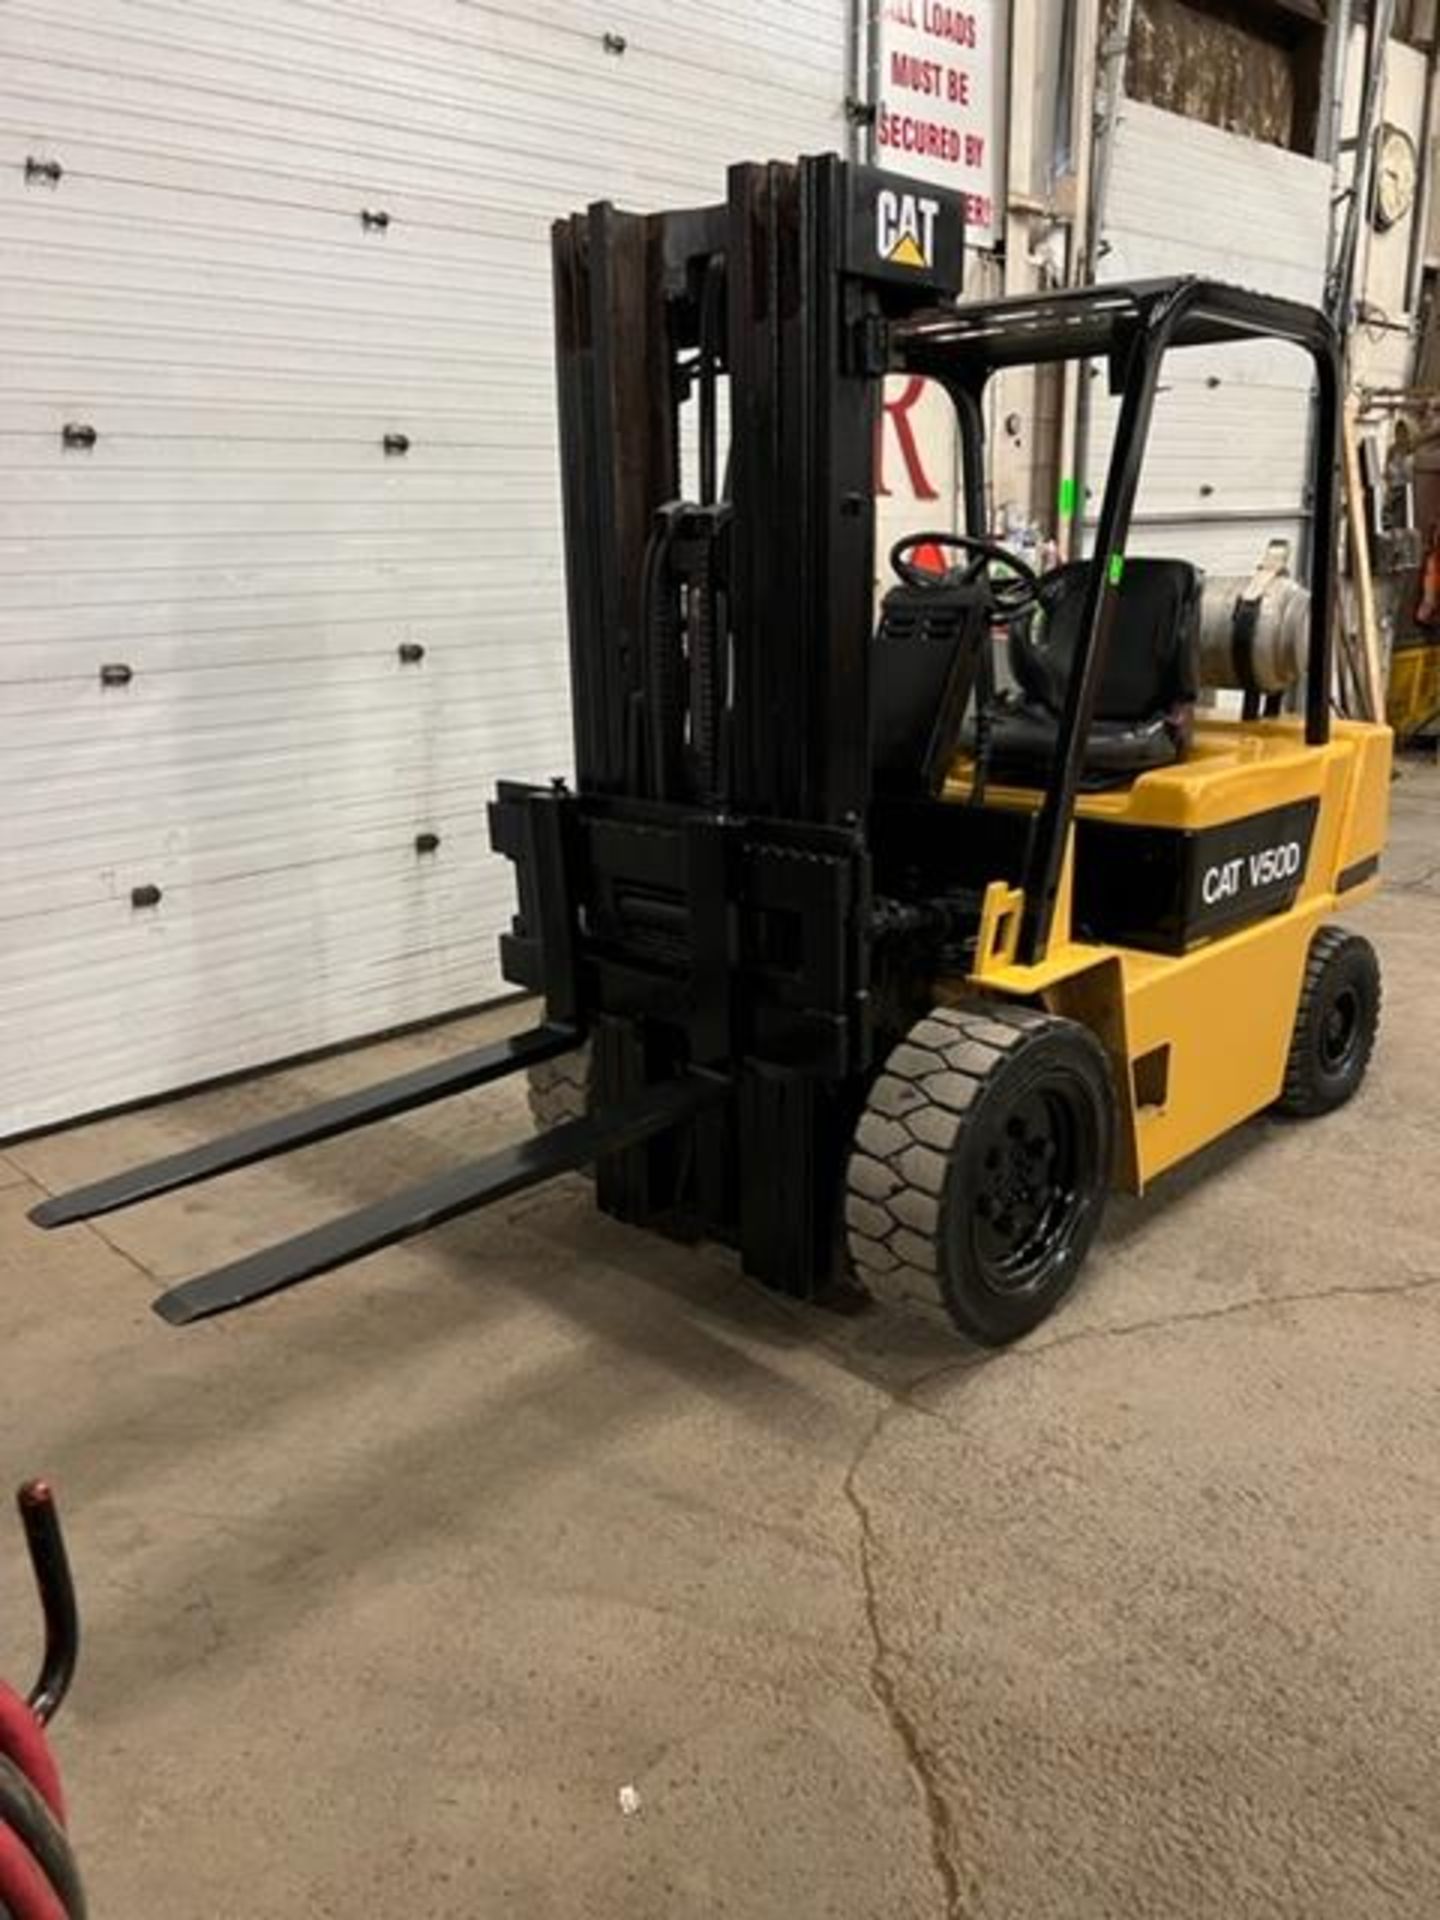 FREE CUSTOMS - CAT model 50 5,000lbs Capacity OUTDOOR Forklift LPG (propane) with SIDESHIFT - Image 2 of 3